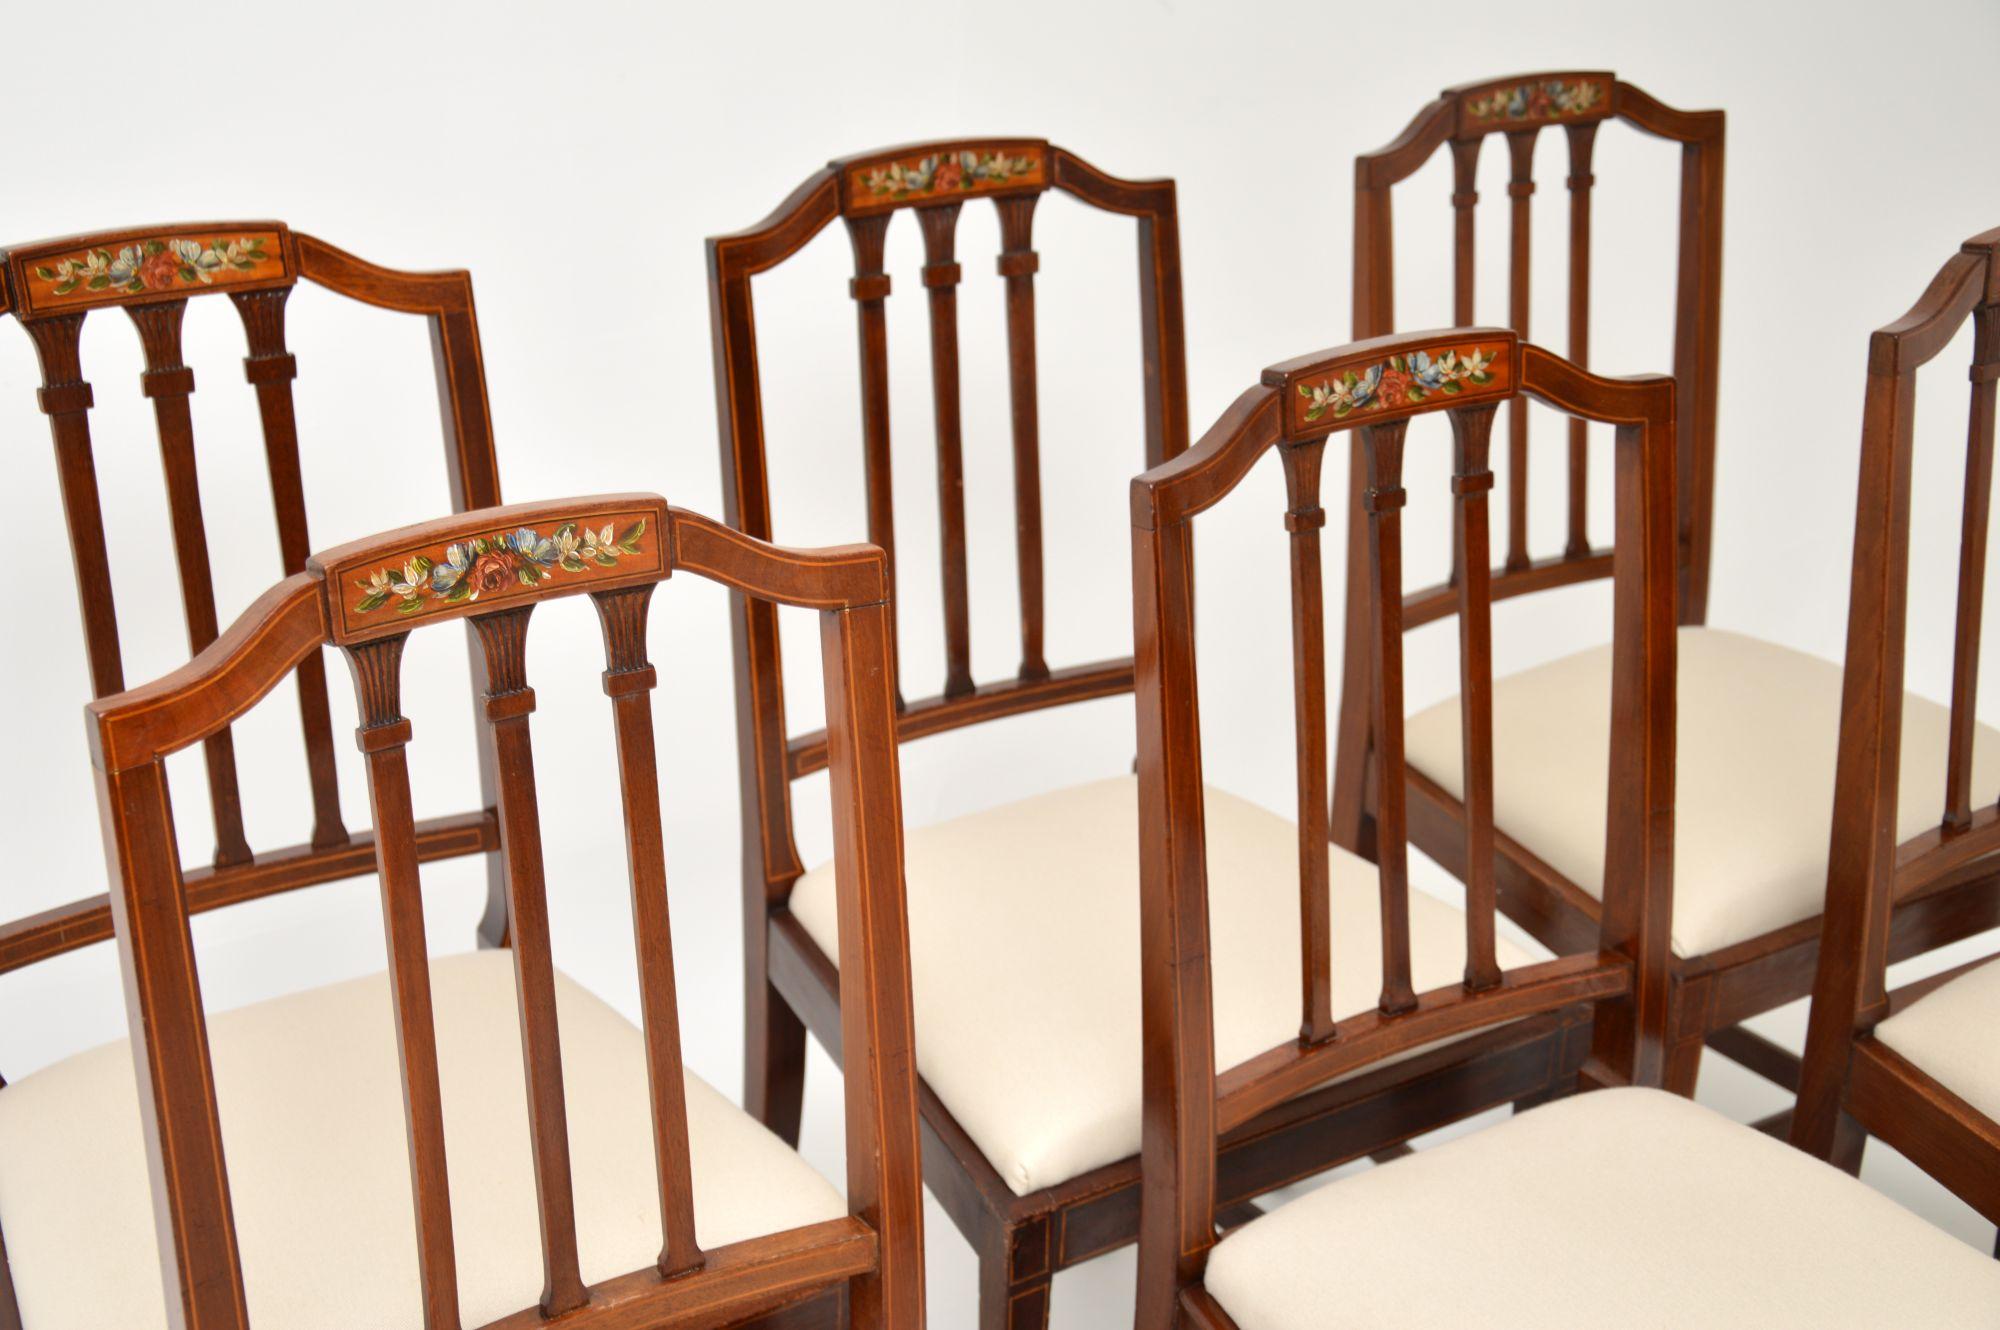 A stunning set of antique Edwardian dining chairs in wood. These were made in England, they date from around the 1900-1910 period.
The quality is superb, they are solid wood with satin wood inlay and beautifully hand painted floral motifs on the